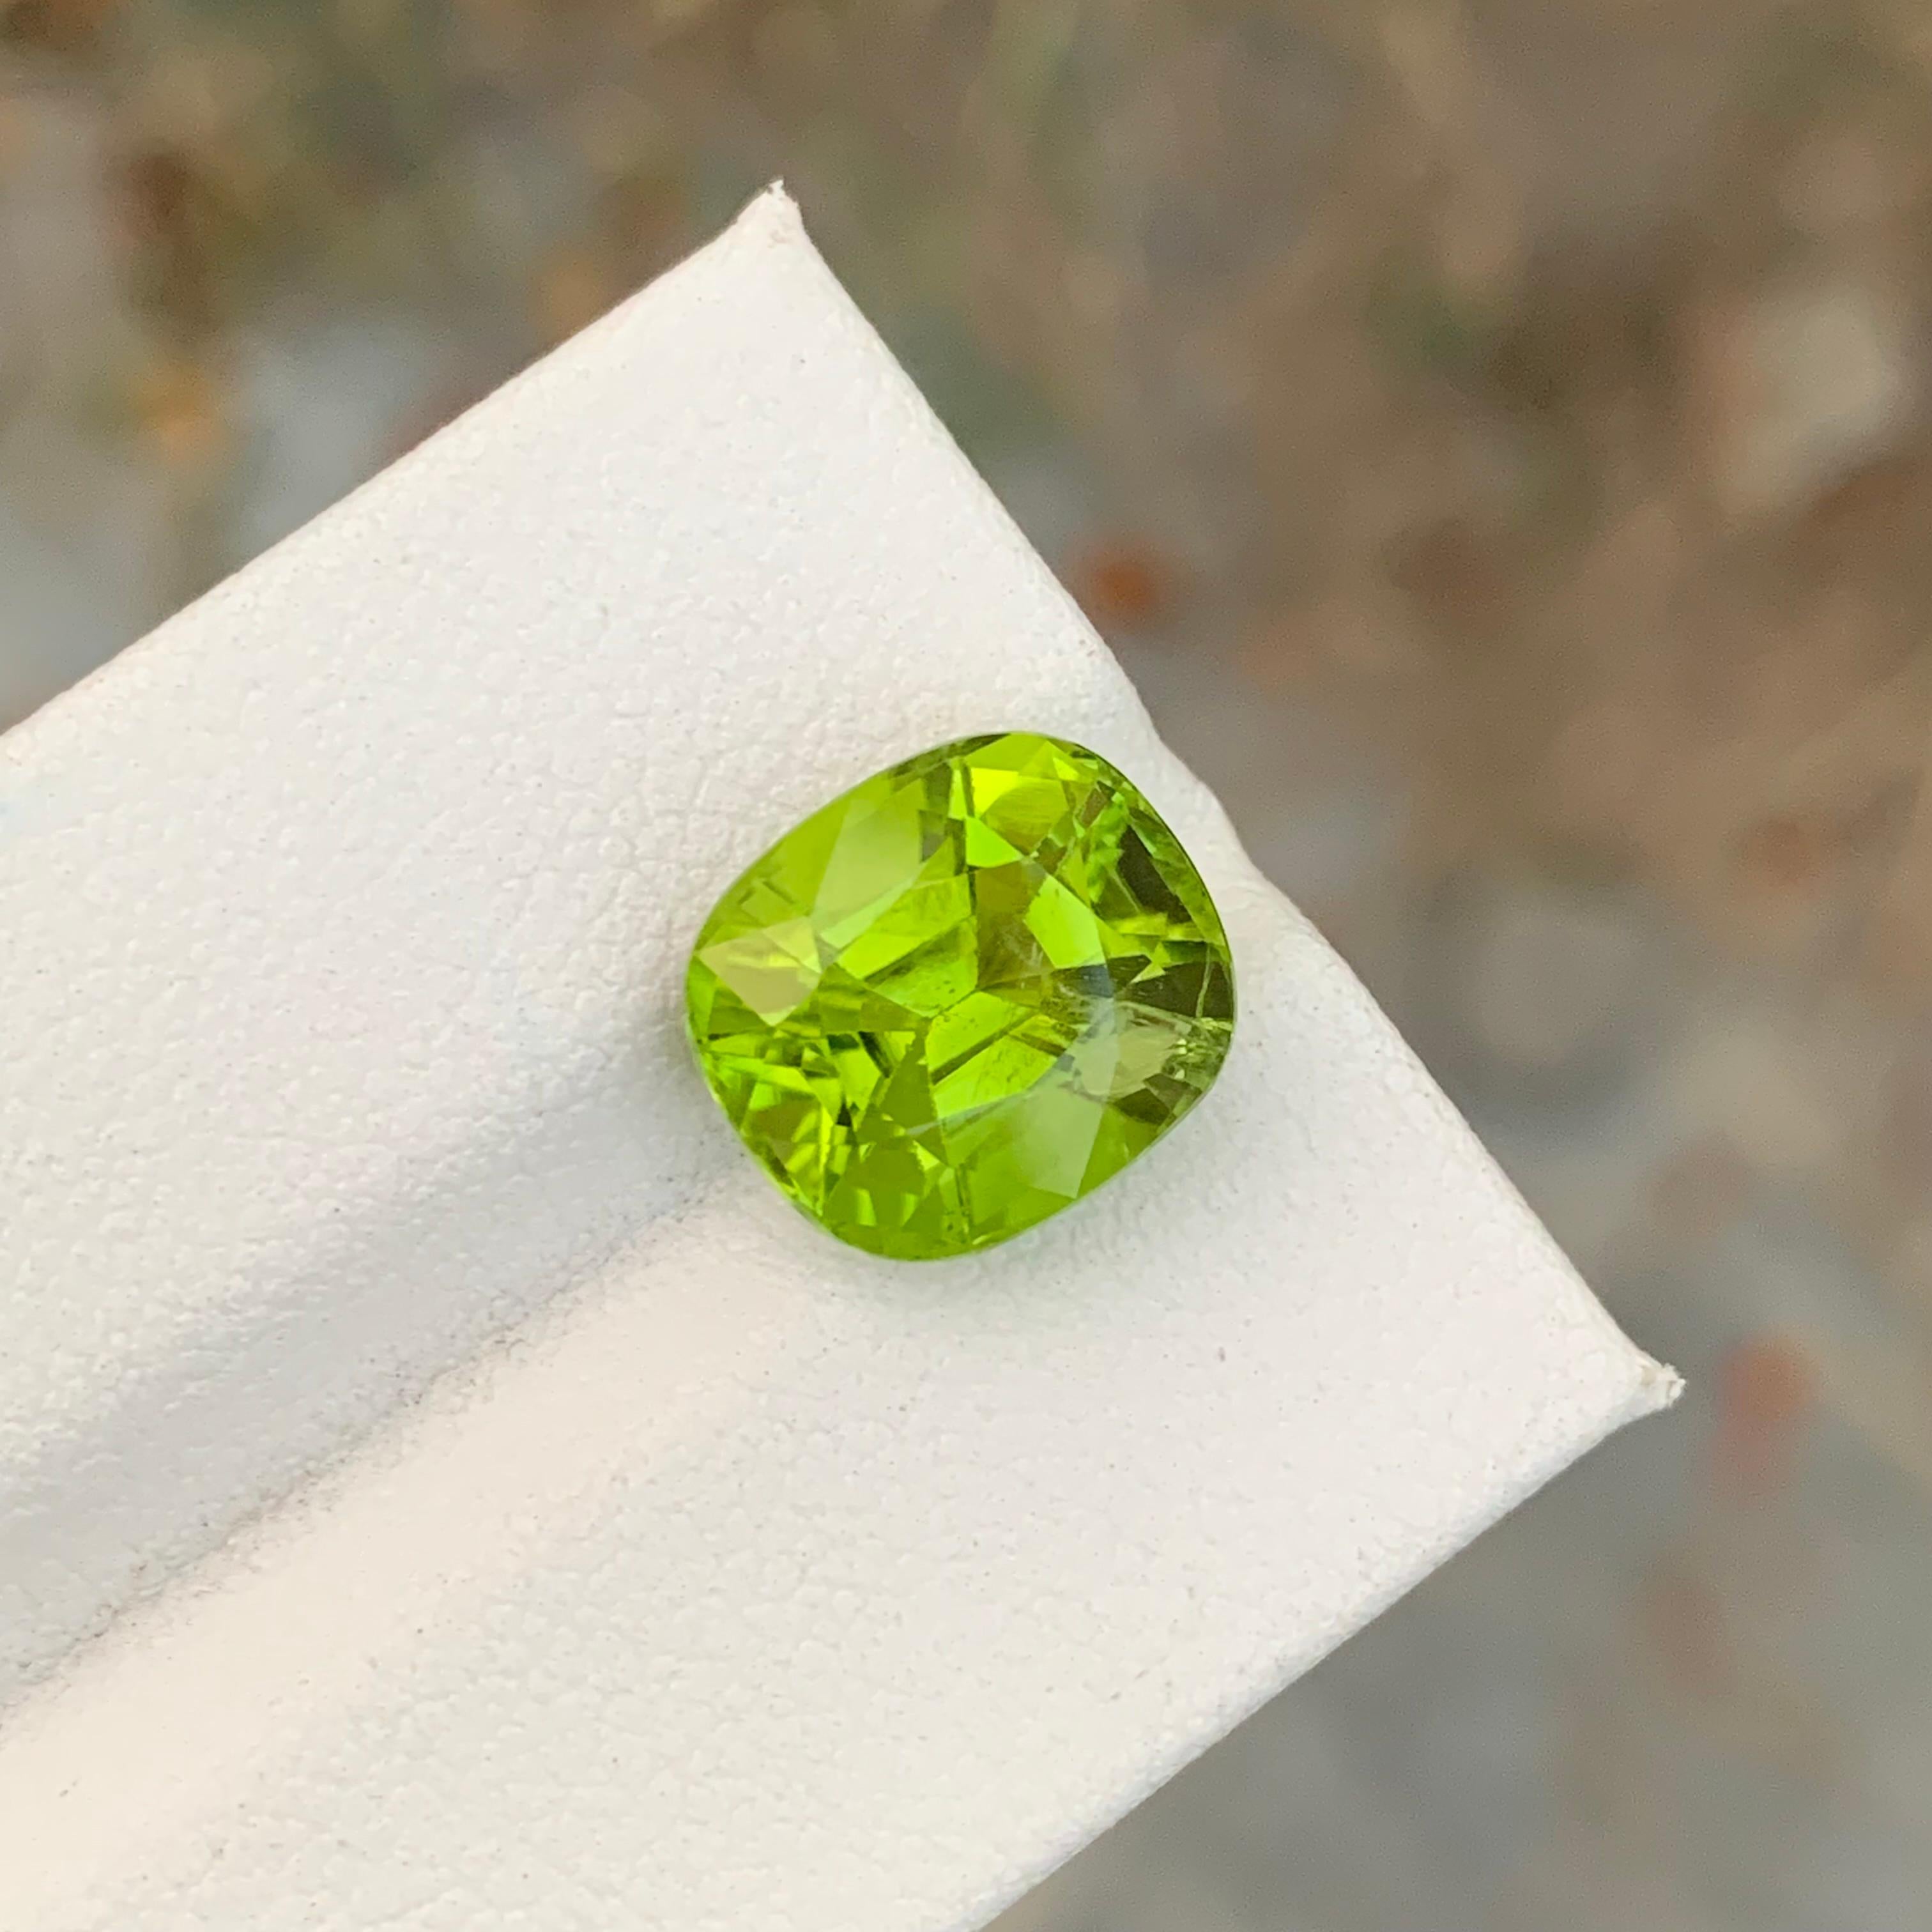 Loose Peridot
Weight: 6.05 Cts
Dimension: 11x9.8x7.6 Mm
Origin: Pakistan
Shape: Cushion
Color: Green
Treatment: Non
Certificate: On Demand
Peridot, often referred to as the 